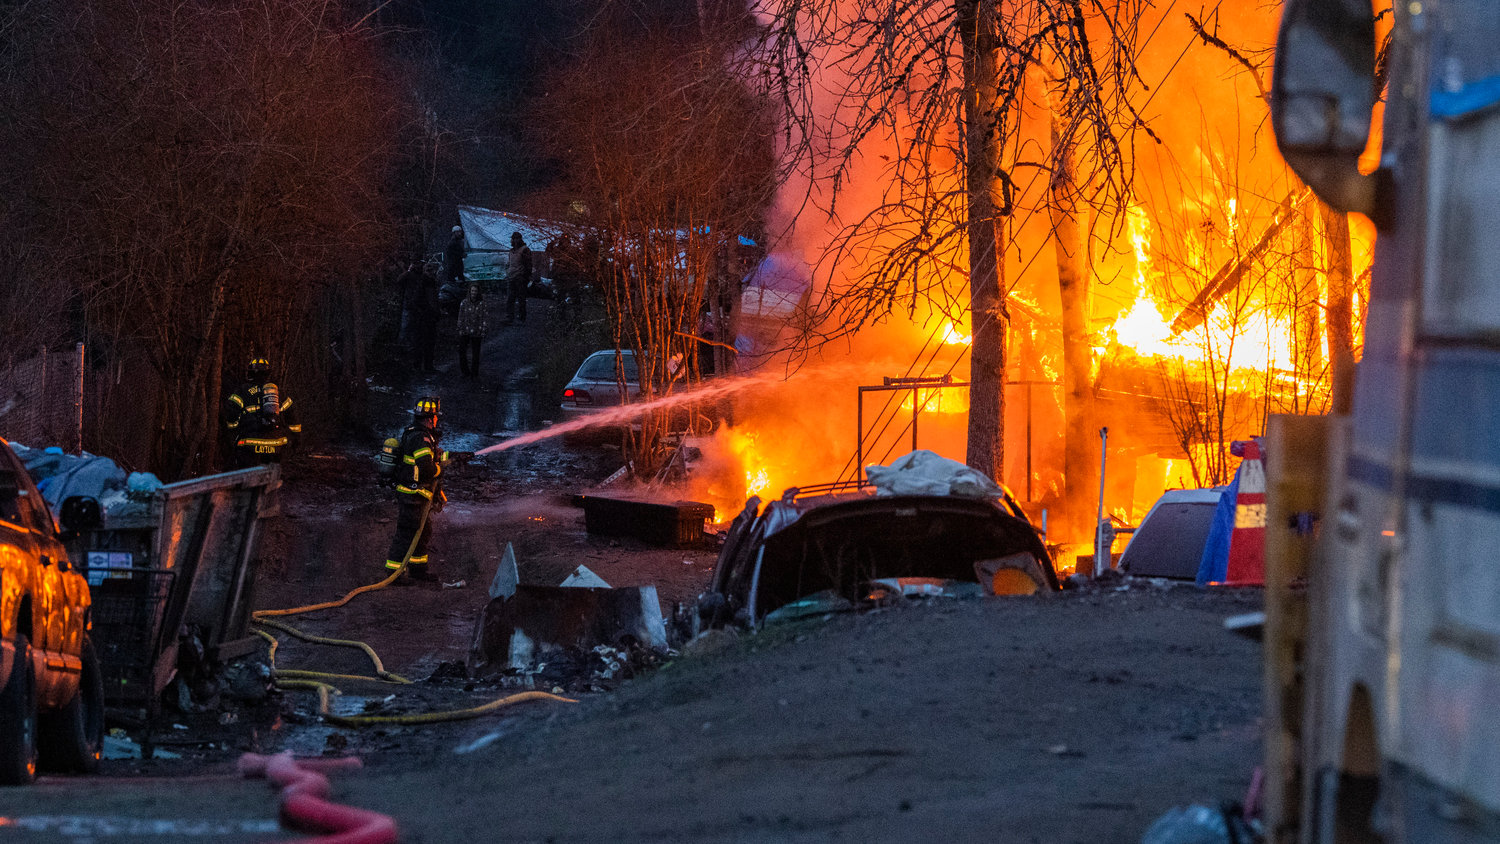 Riverside Fire Authority, Centralia Police and Chehalis Fire respond to a scene at the end of Eckerson Road in Centralia near Blakeslee Junction where flames and a column of smoke rose from a structure inside a homeless encampment Tuesday, March 28, 2023.